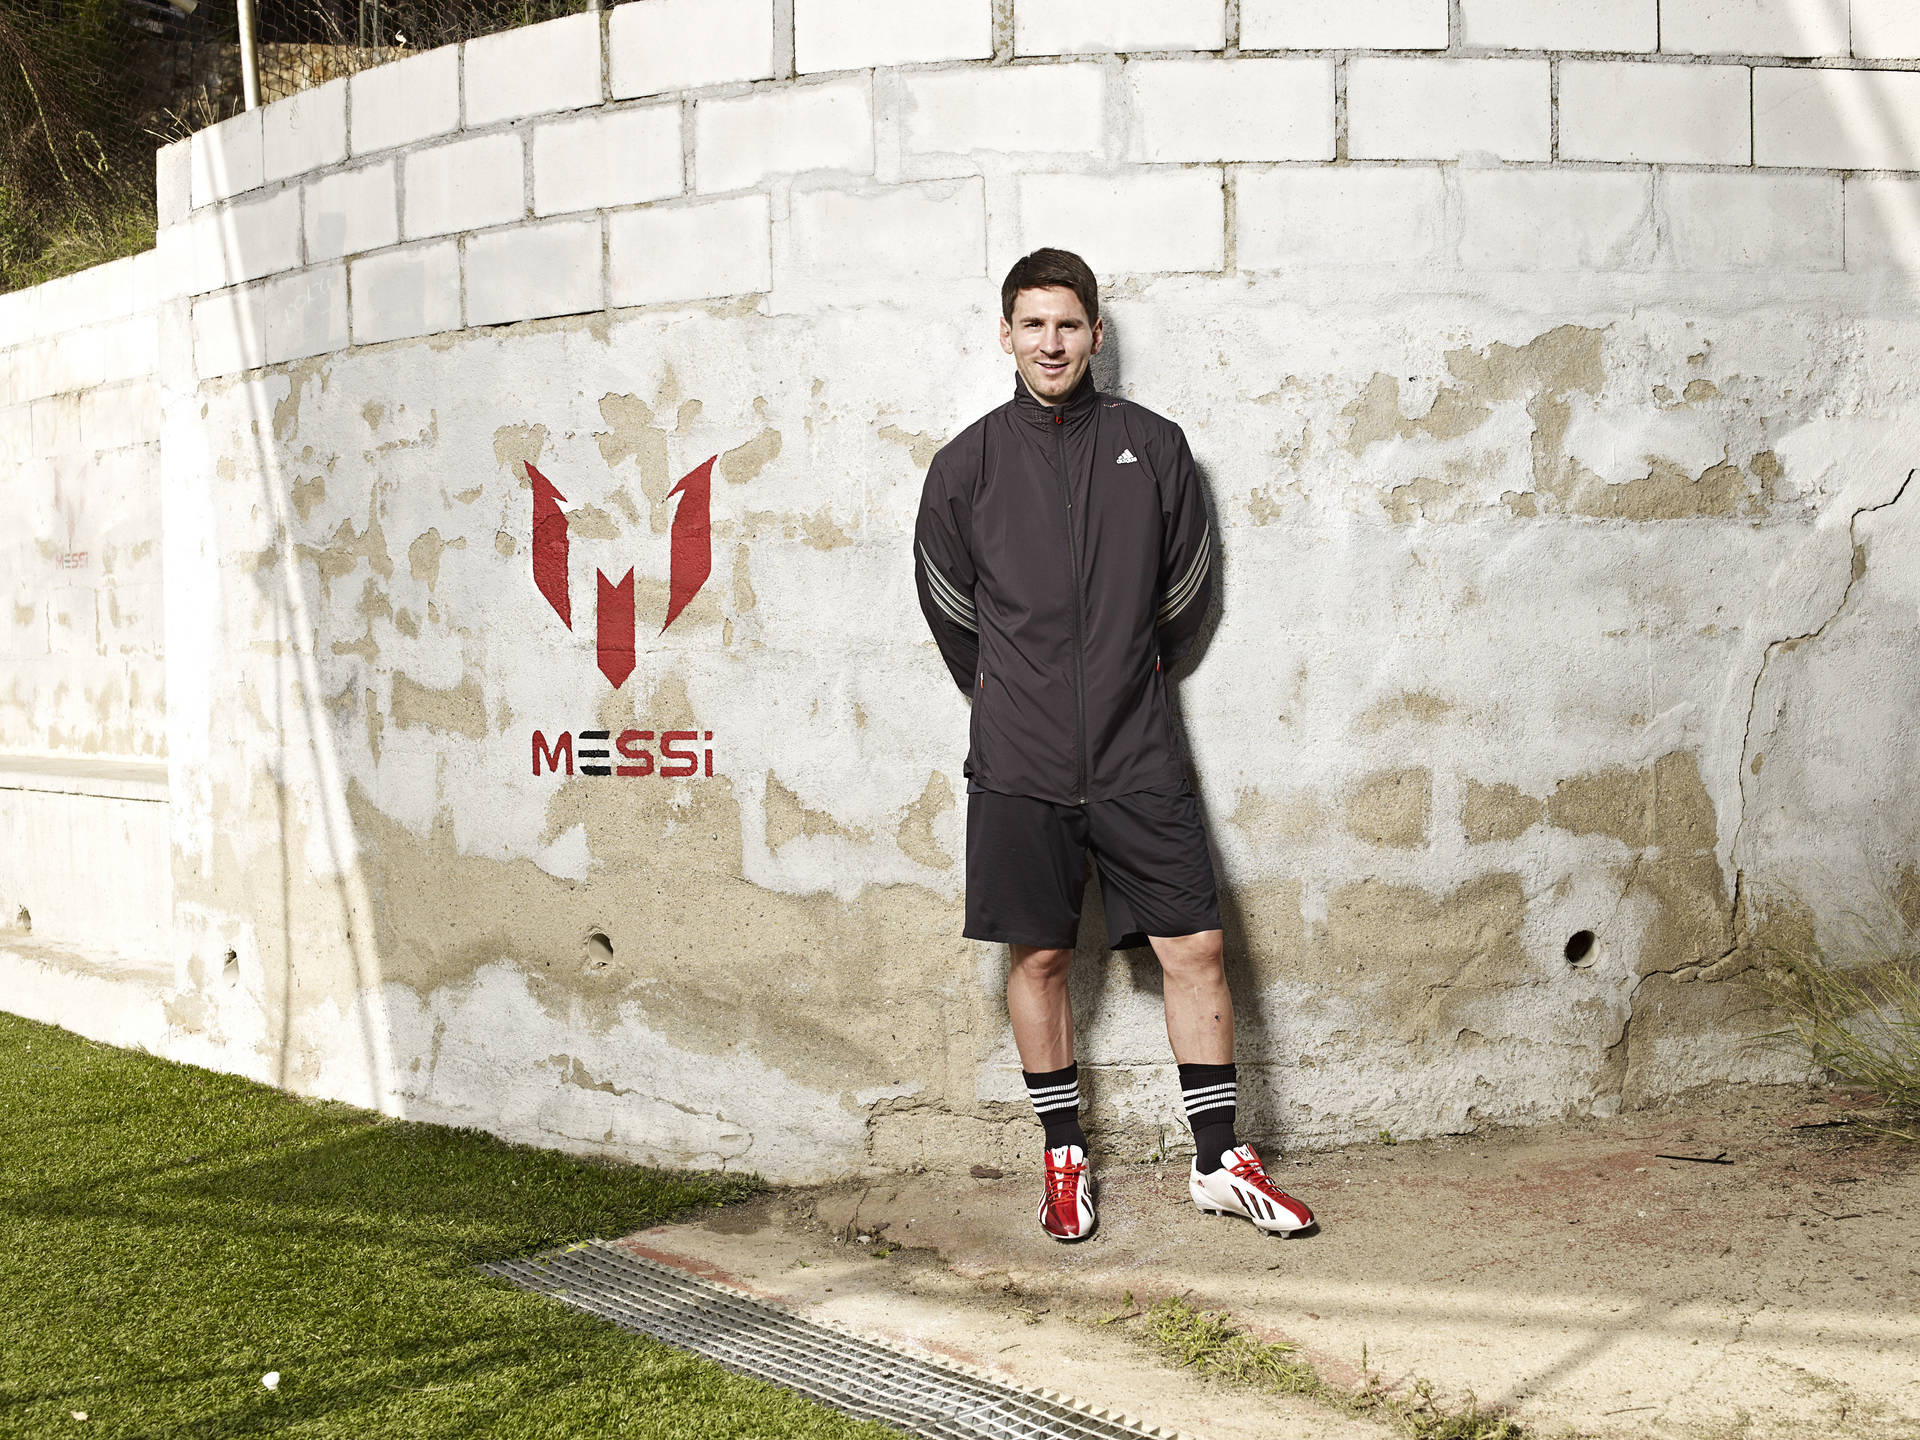 Lionel Messi With Messi Logo